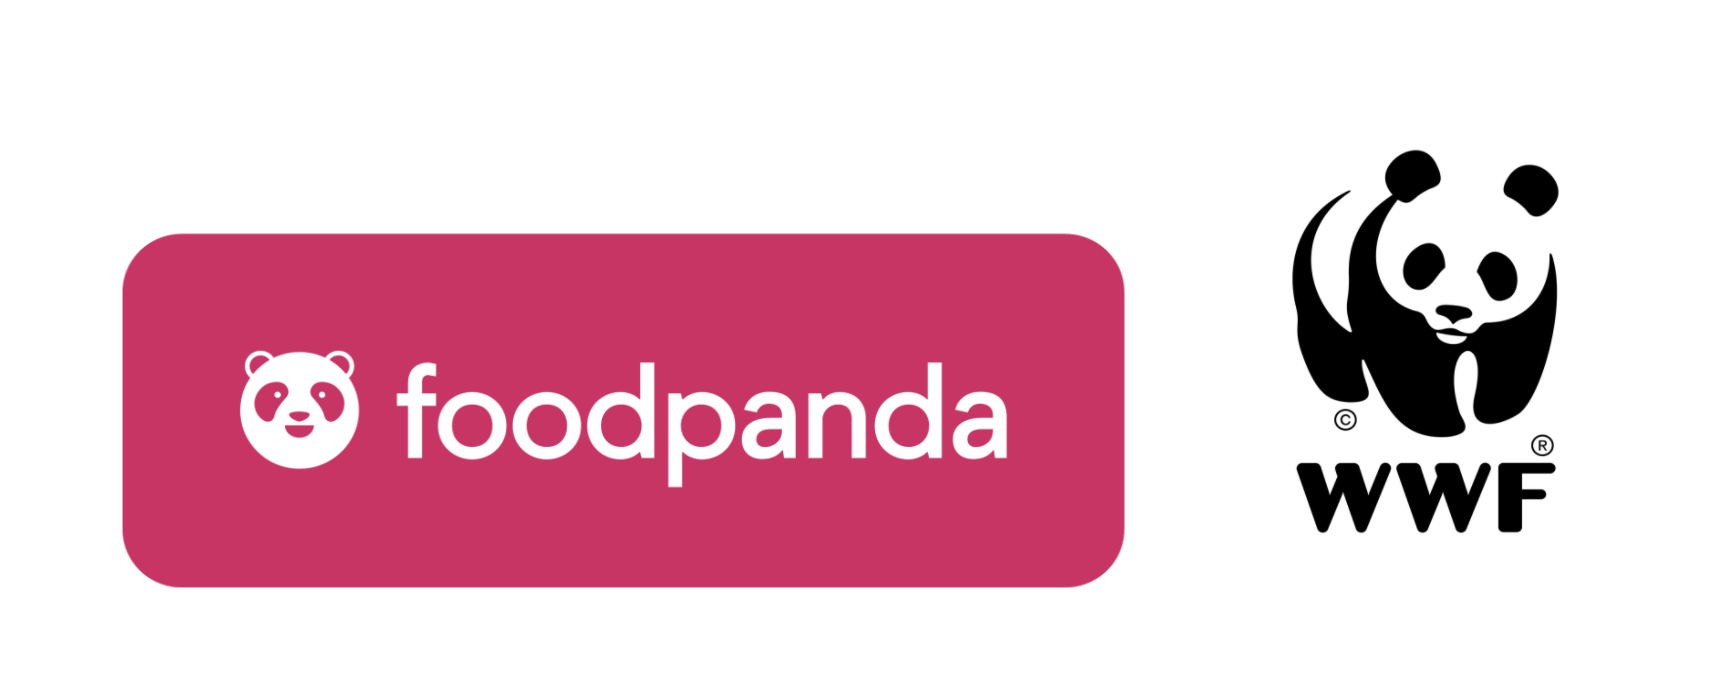 Image - foodpanda Hong Kong launches “Sustainable Restaurant Certification Scheme” Incentivising Restaurants to Go Green